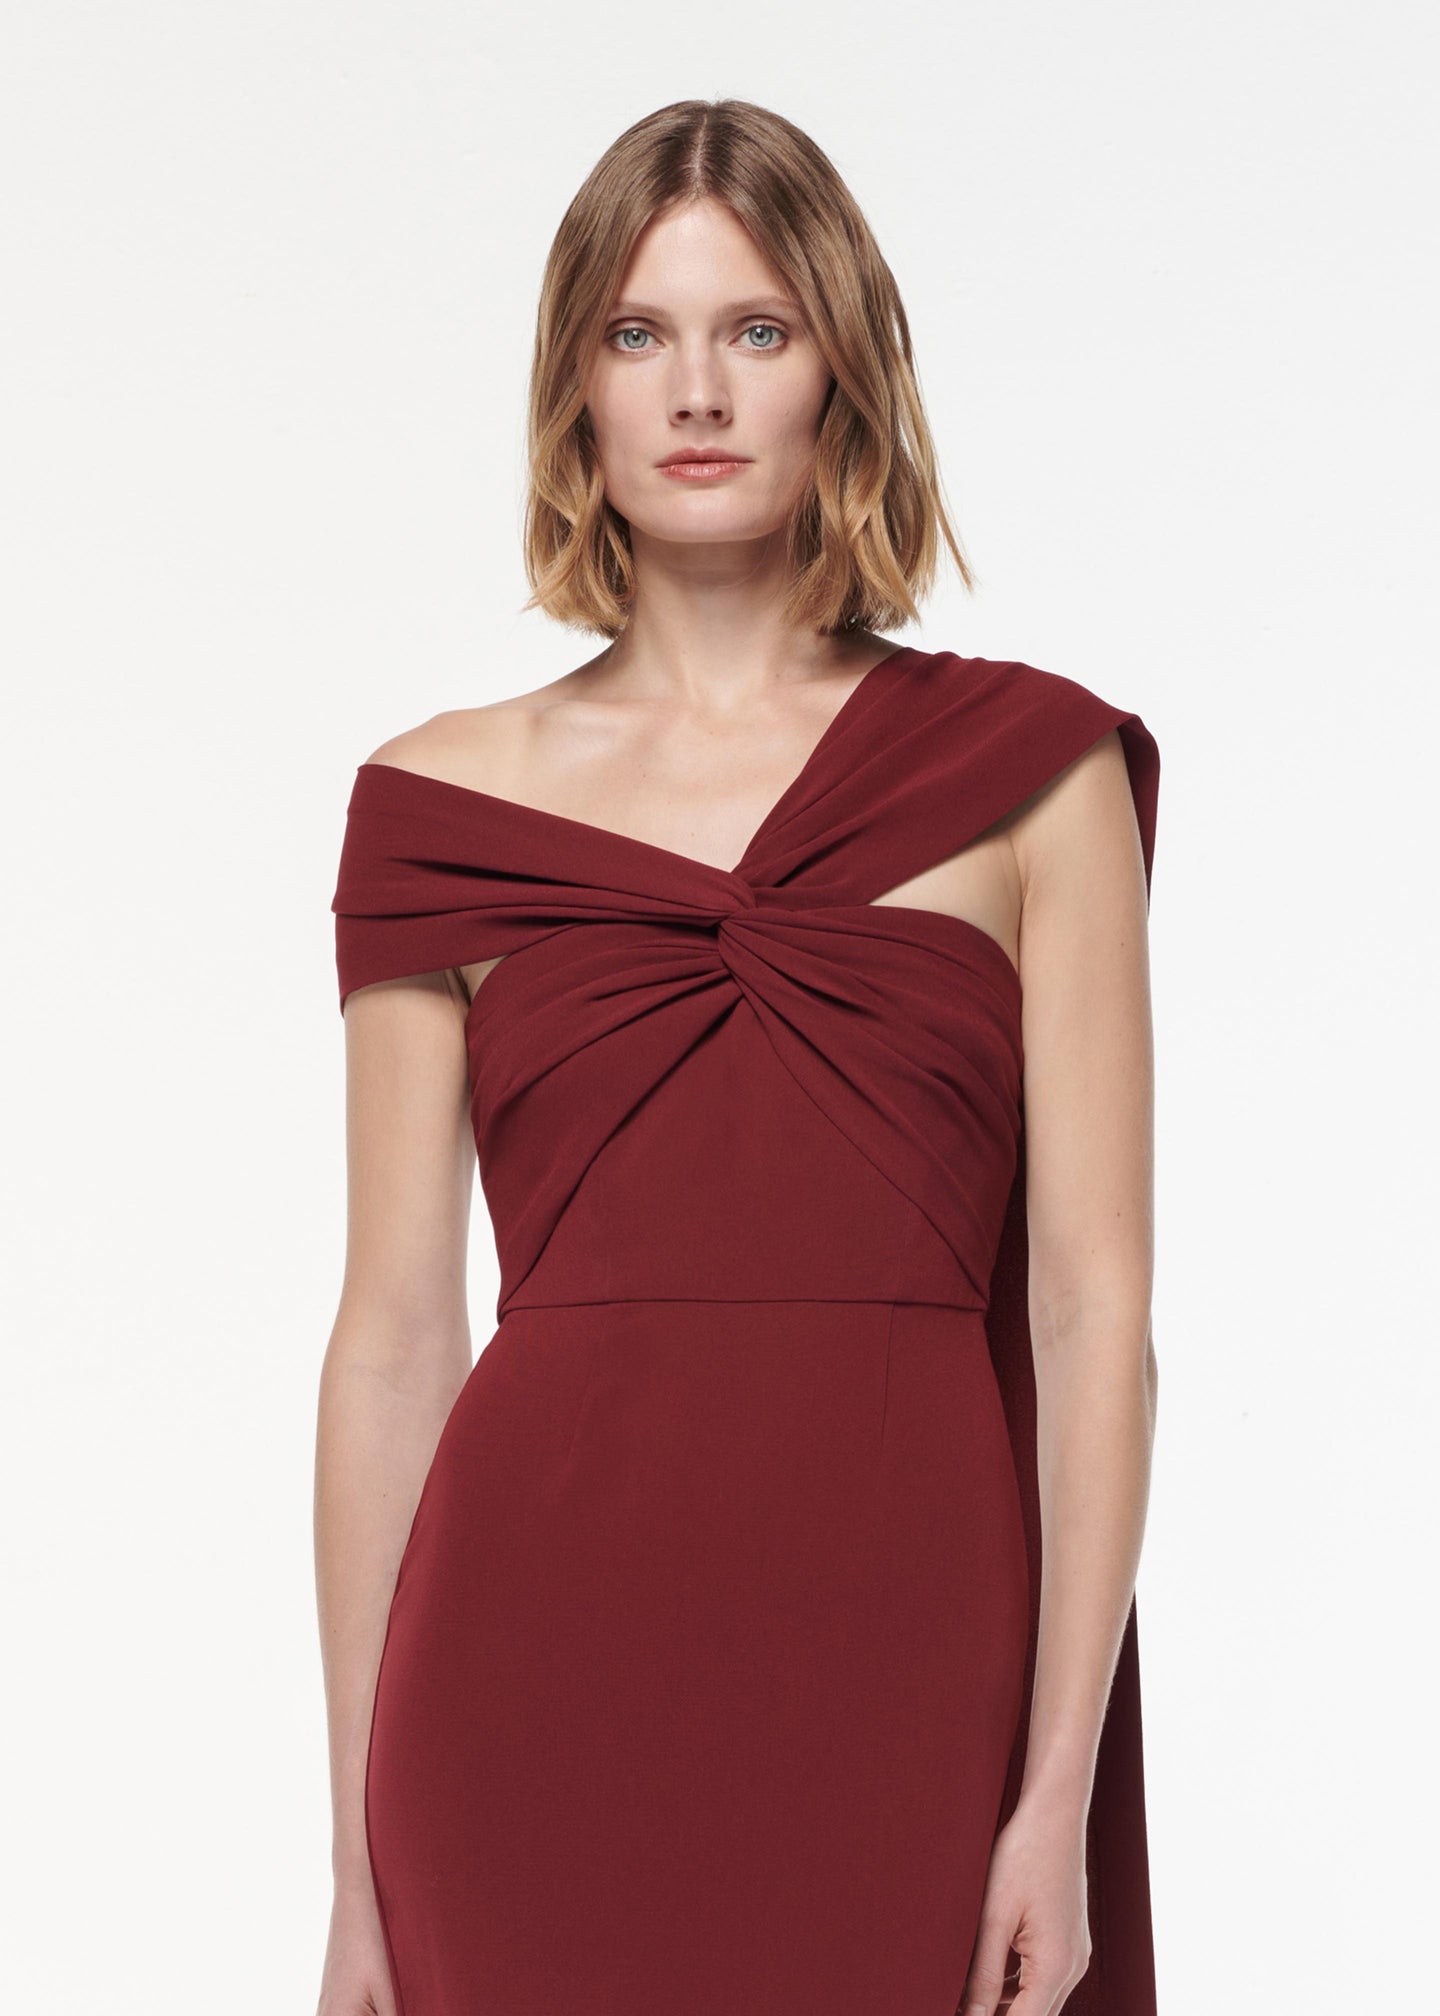 A photograph of a woman wearing a Asymmetric Light Cady Gown in Burgundy